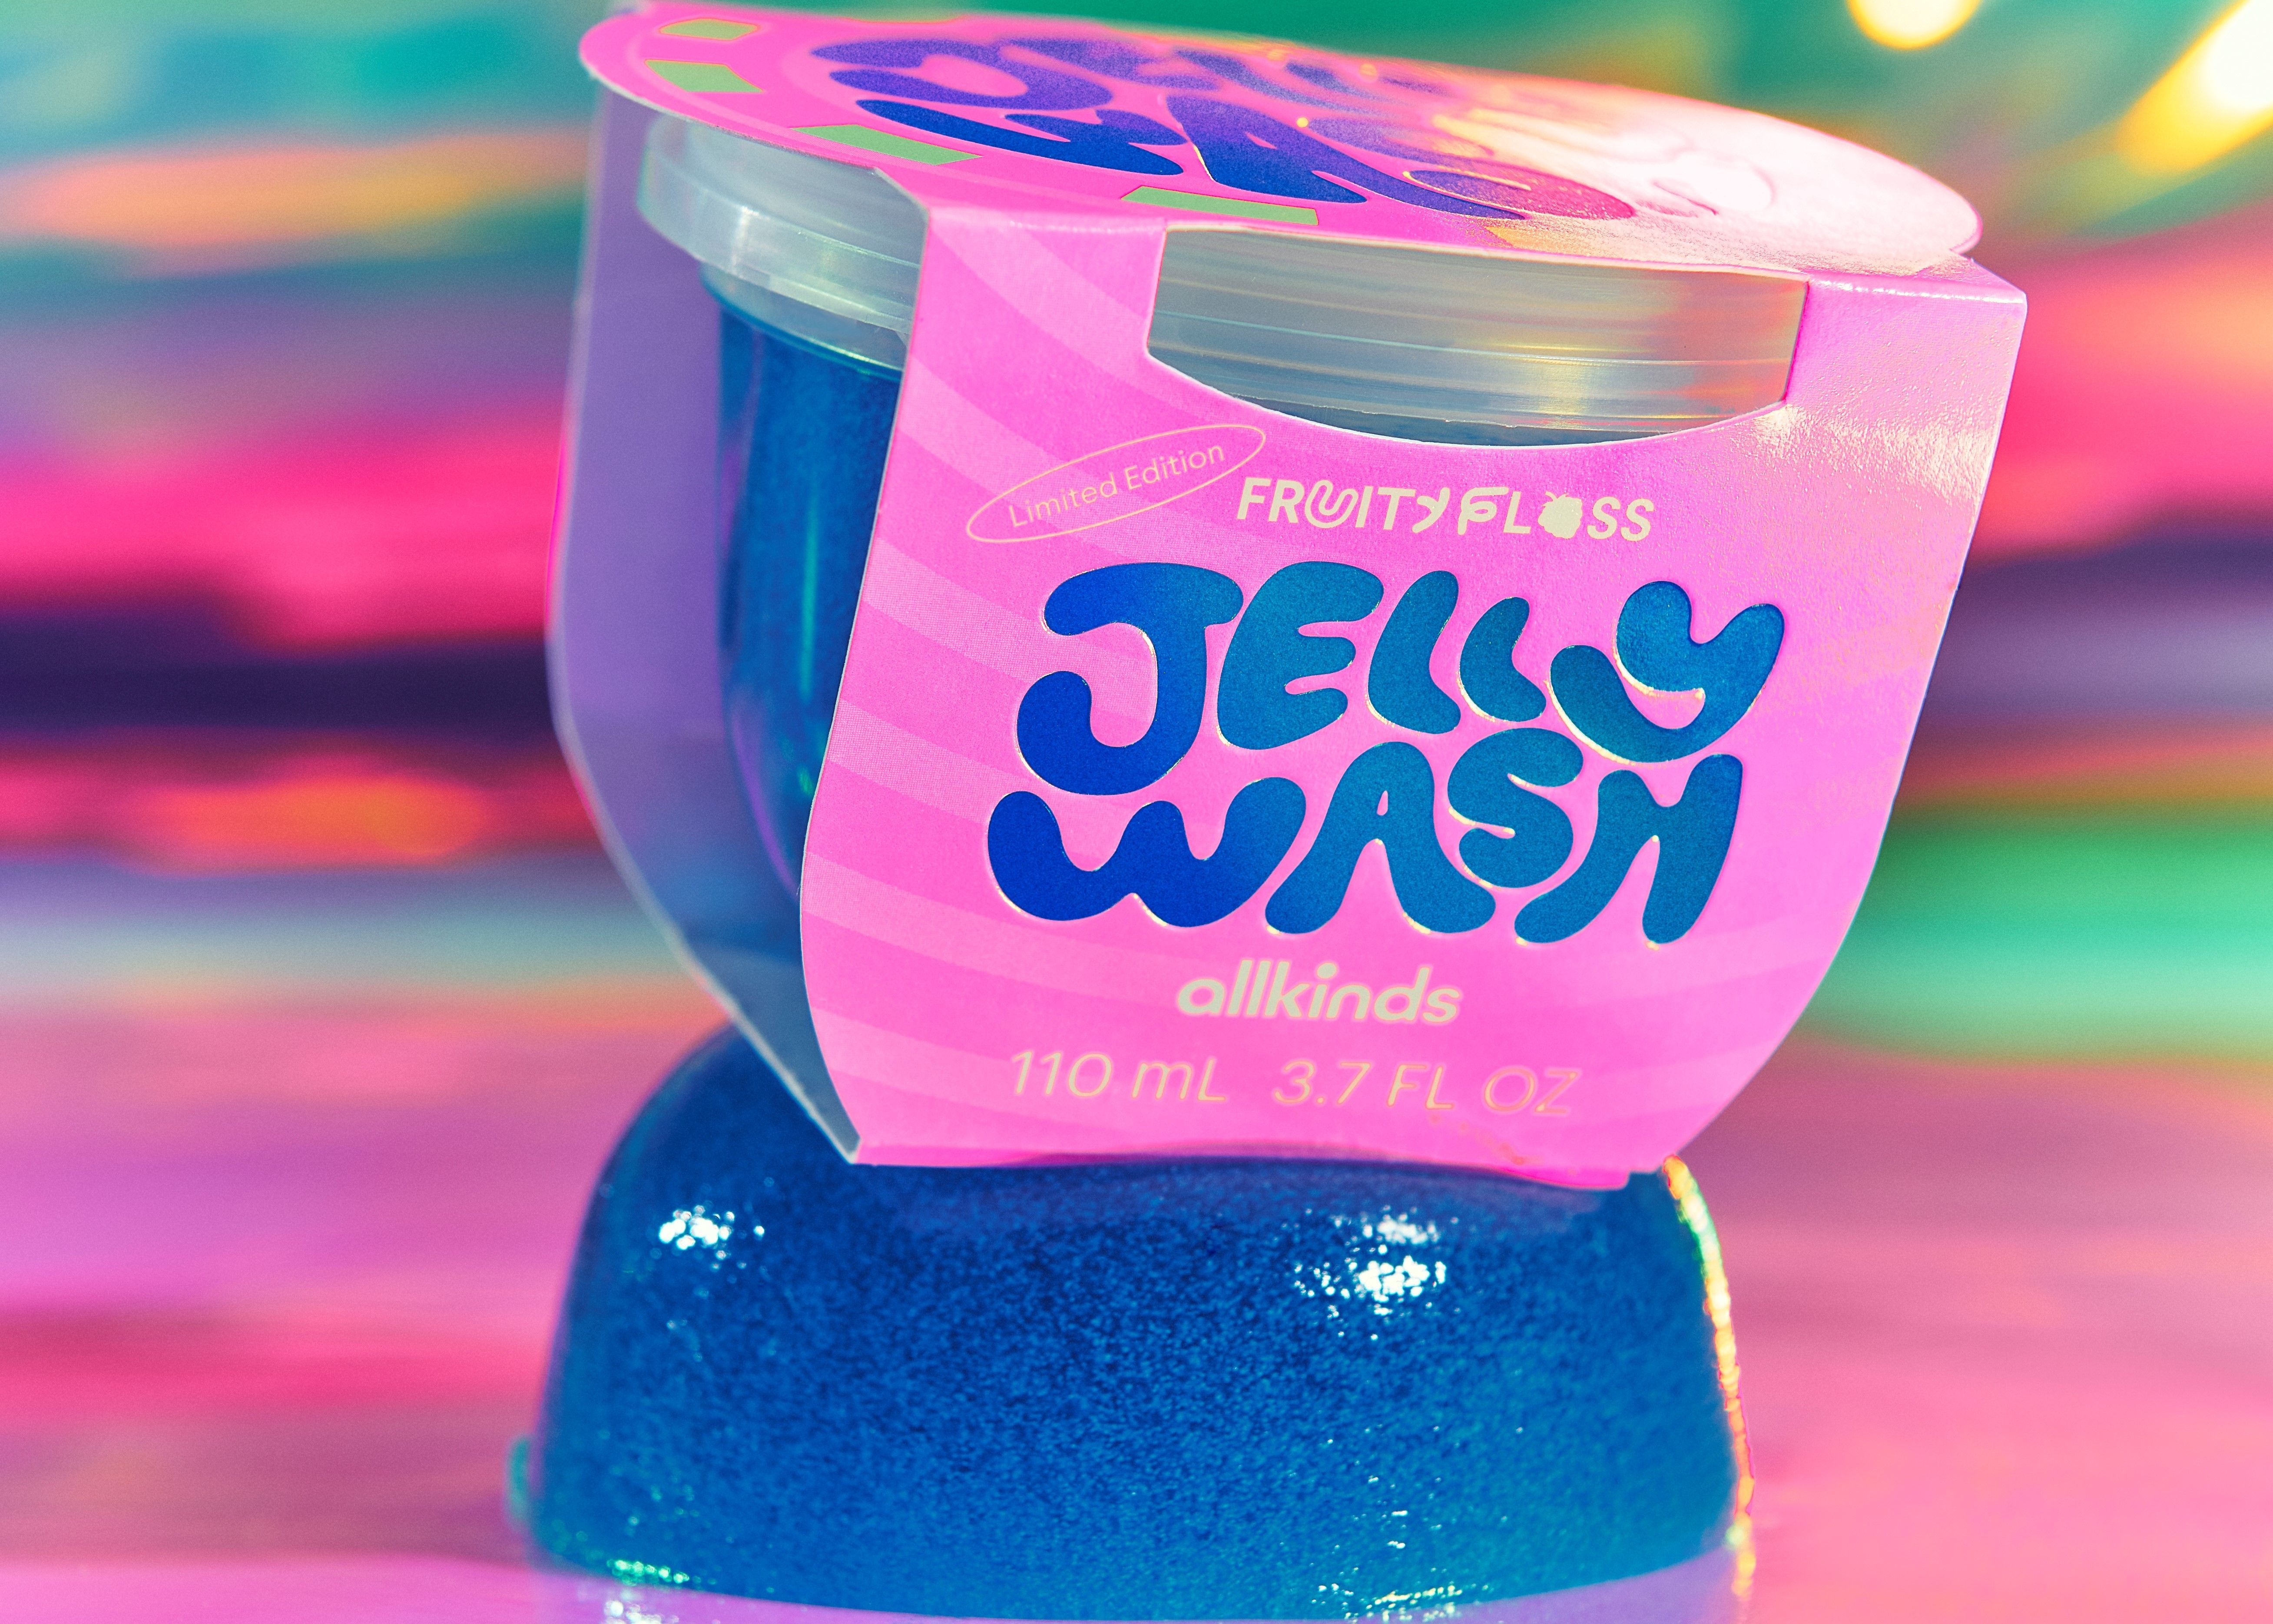 Jelly Wash on top of a jelly wash